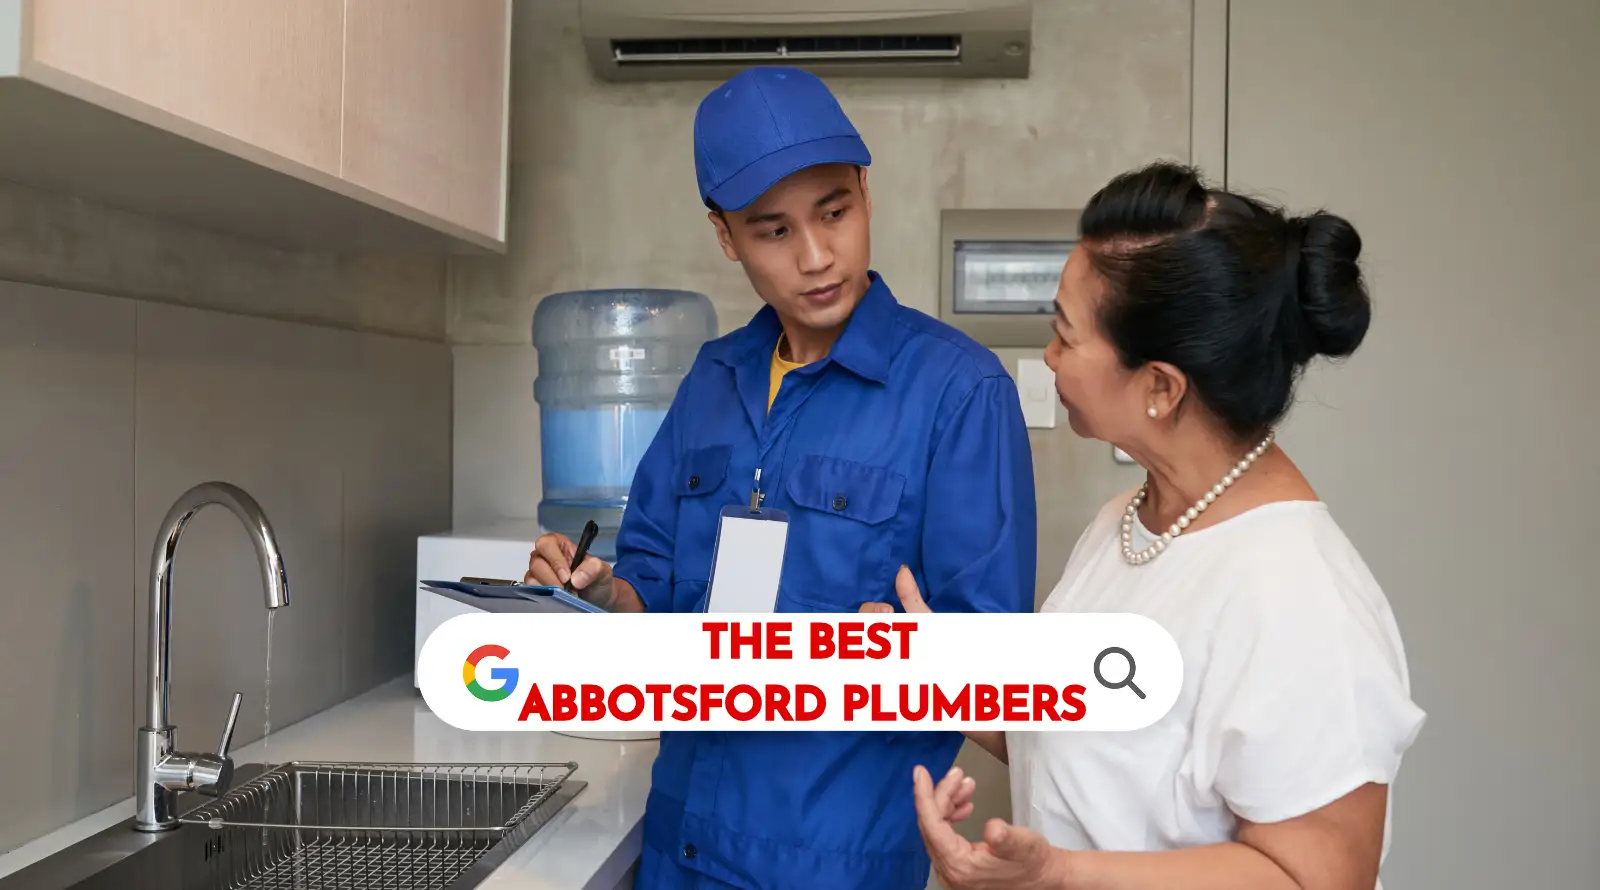 Best plumbers in Abbotsford, BC